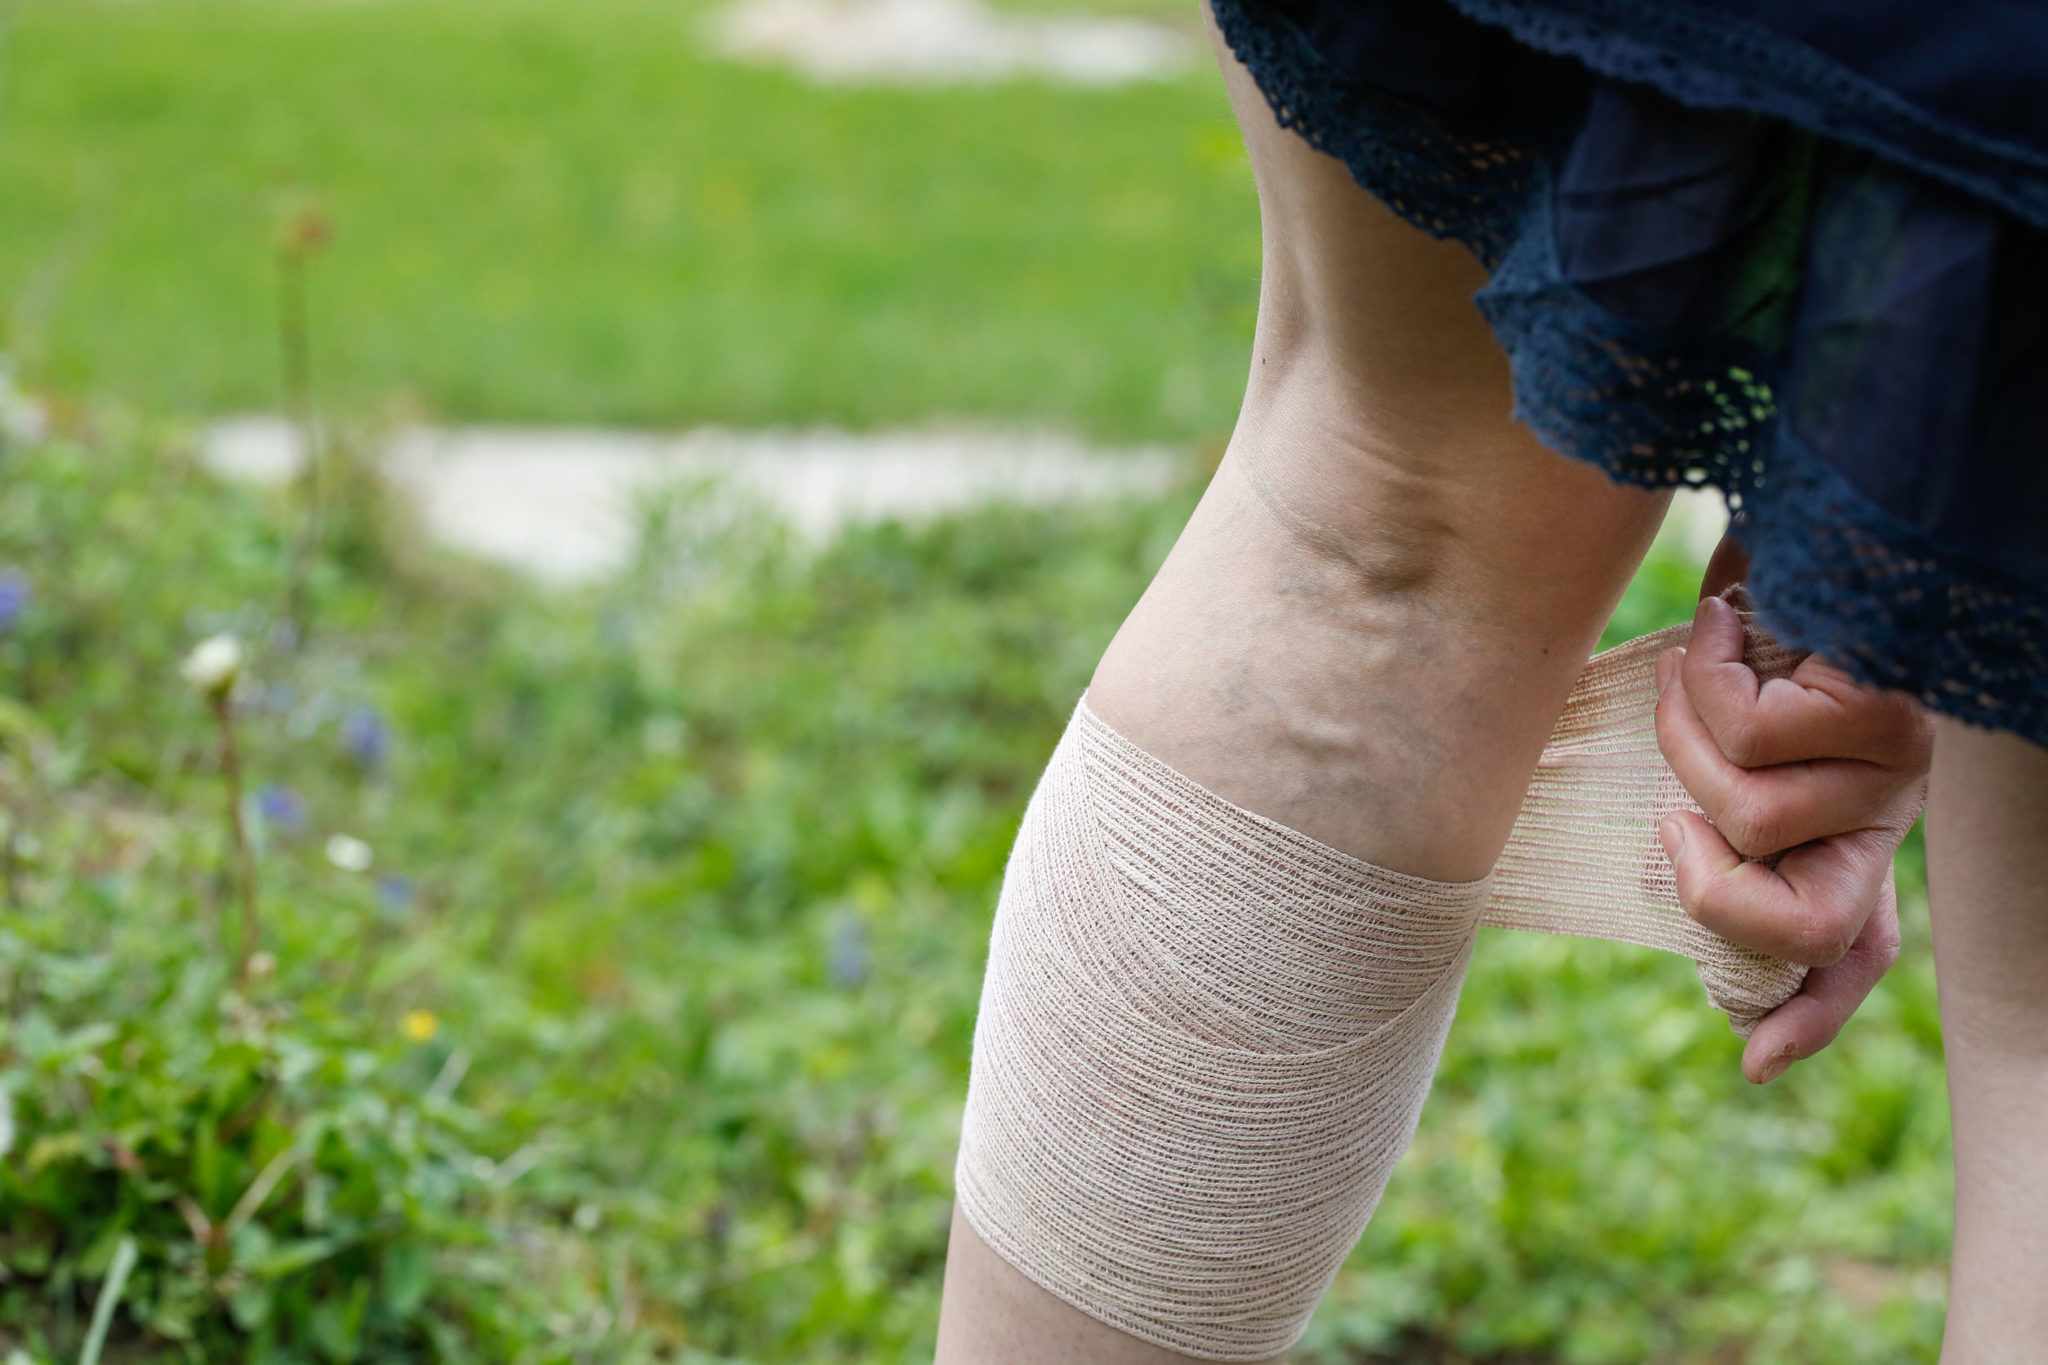 Woman with varicose veins applying compression bandage